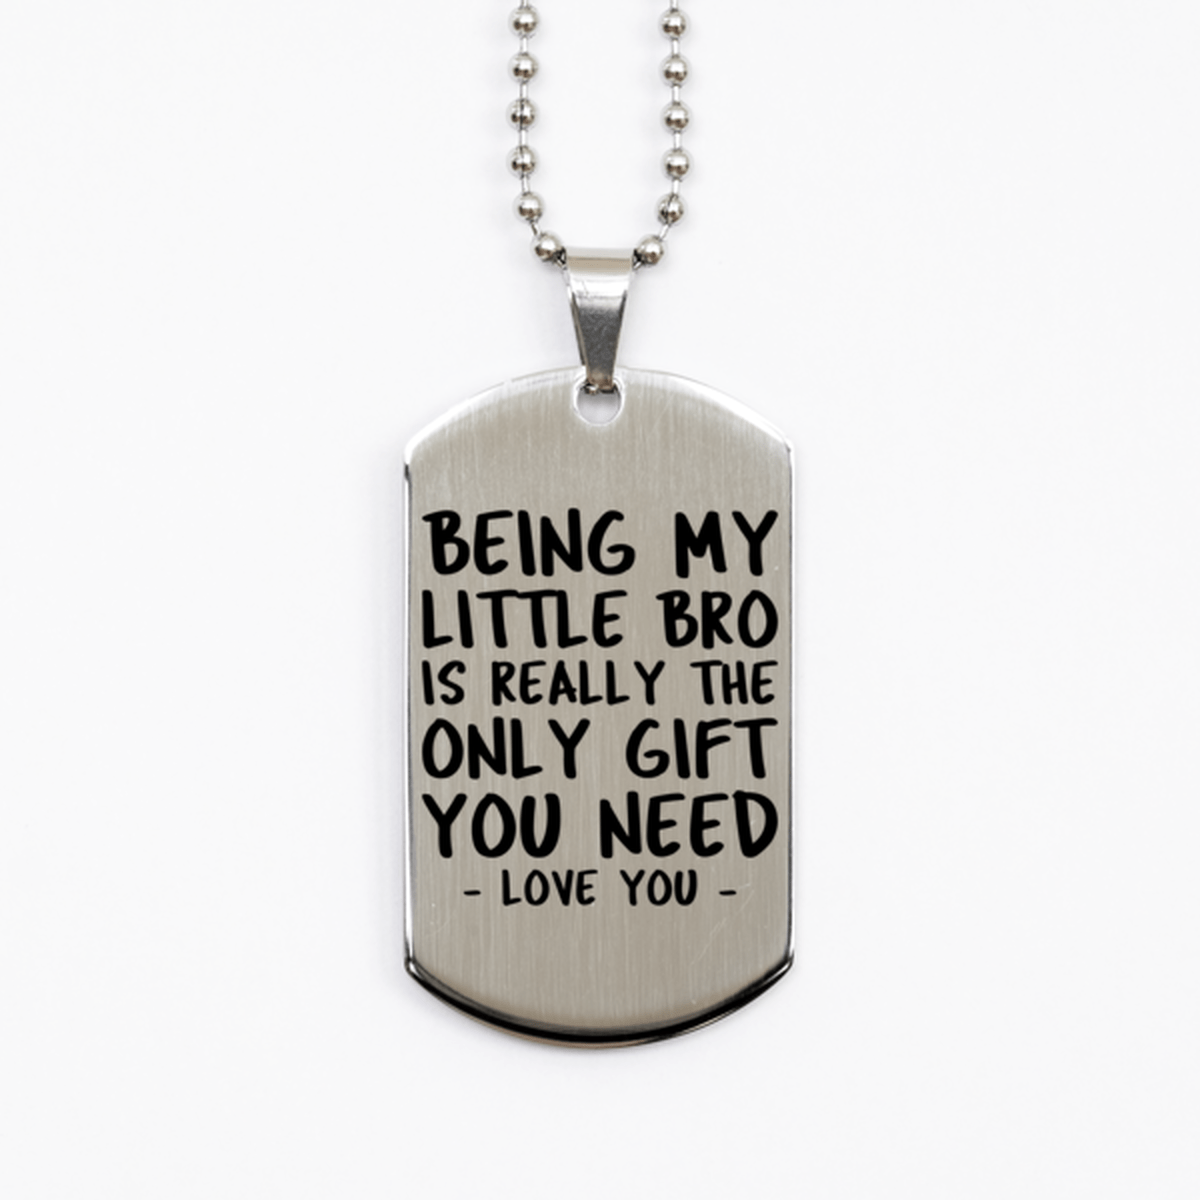 Funny Little Bro Silver Dog Tag Necklace, Being My Little Bro Is Really the Only Gift You Need, Best Birthday Gifts for Little Bro